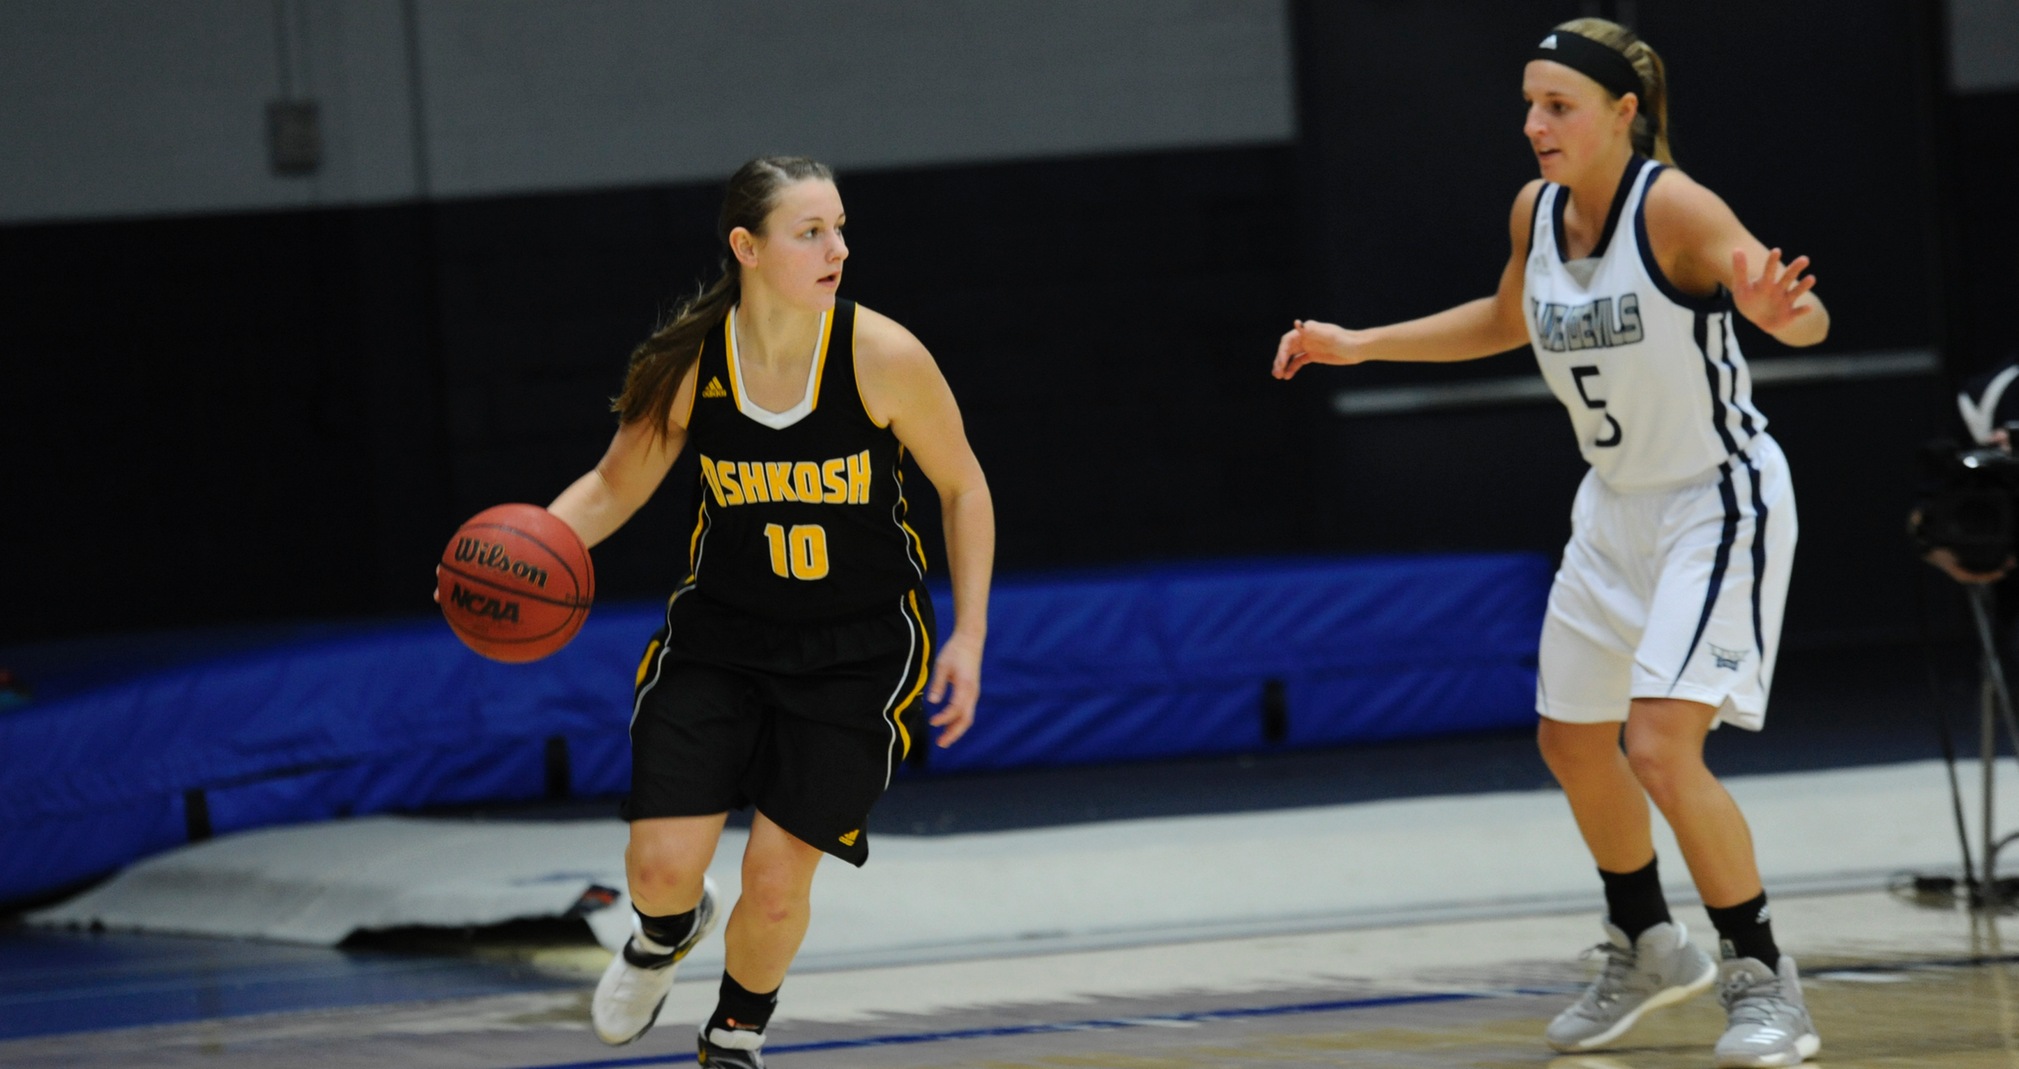 Taylor Schmidt scored 12 points and recorded steals on seven of UW-Stout's 29 turnovers.